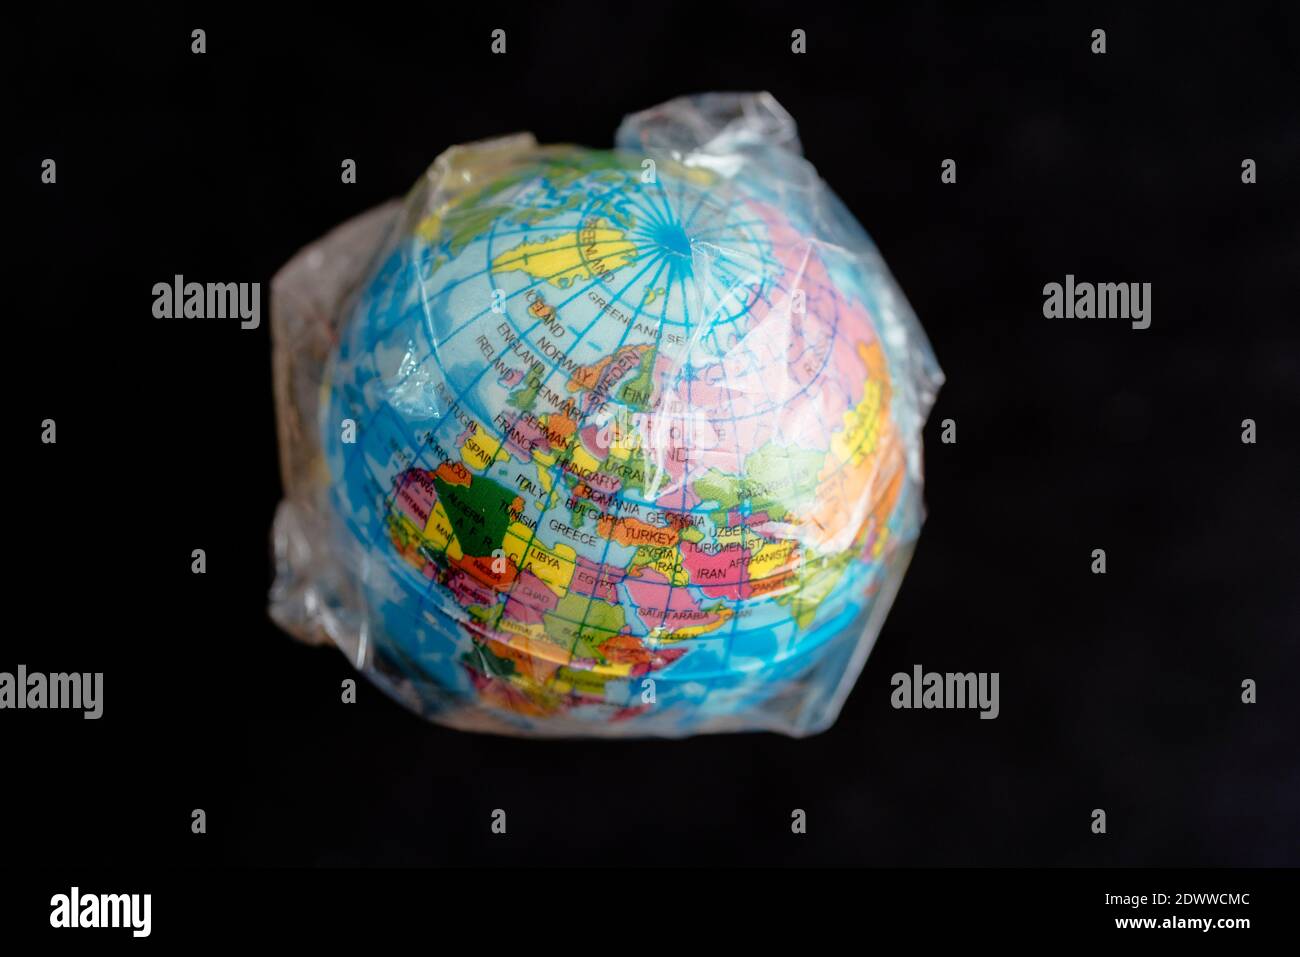 Globe of planet earth wrapped in plastic Stock Photo